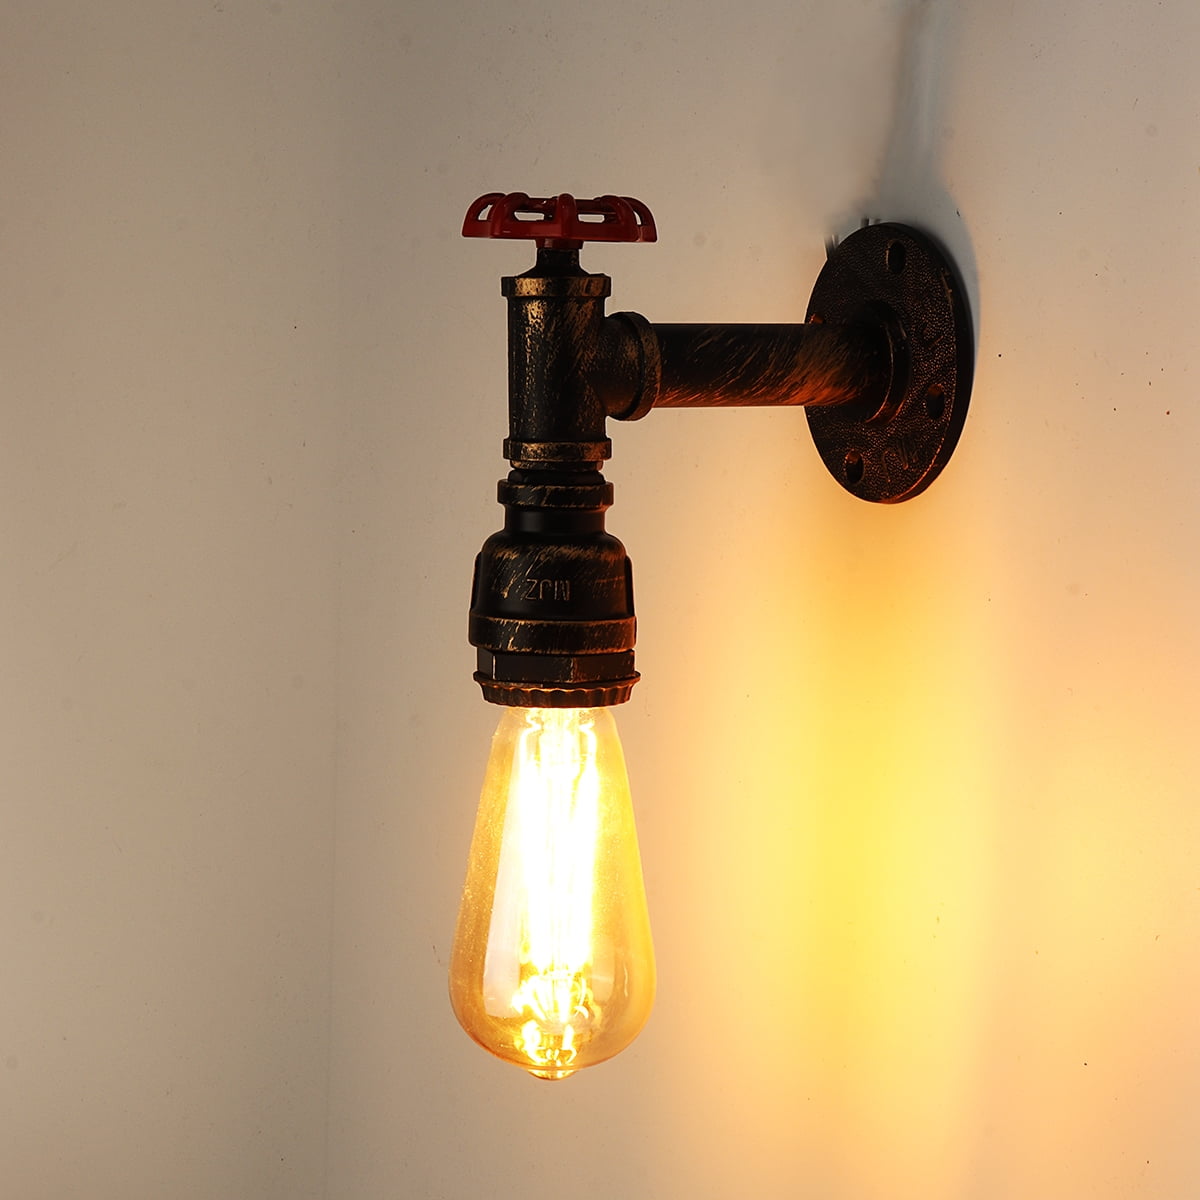 Loft Industrial Wall Pipe Lamp Retro Light Steampunk Vintage Wall Sconce Iron 